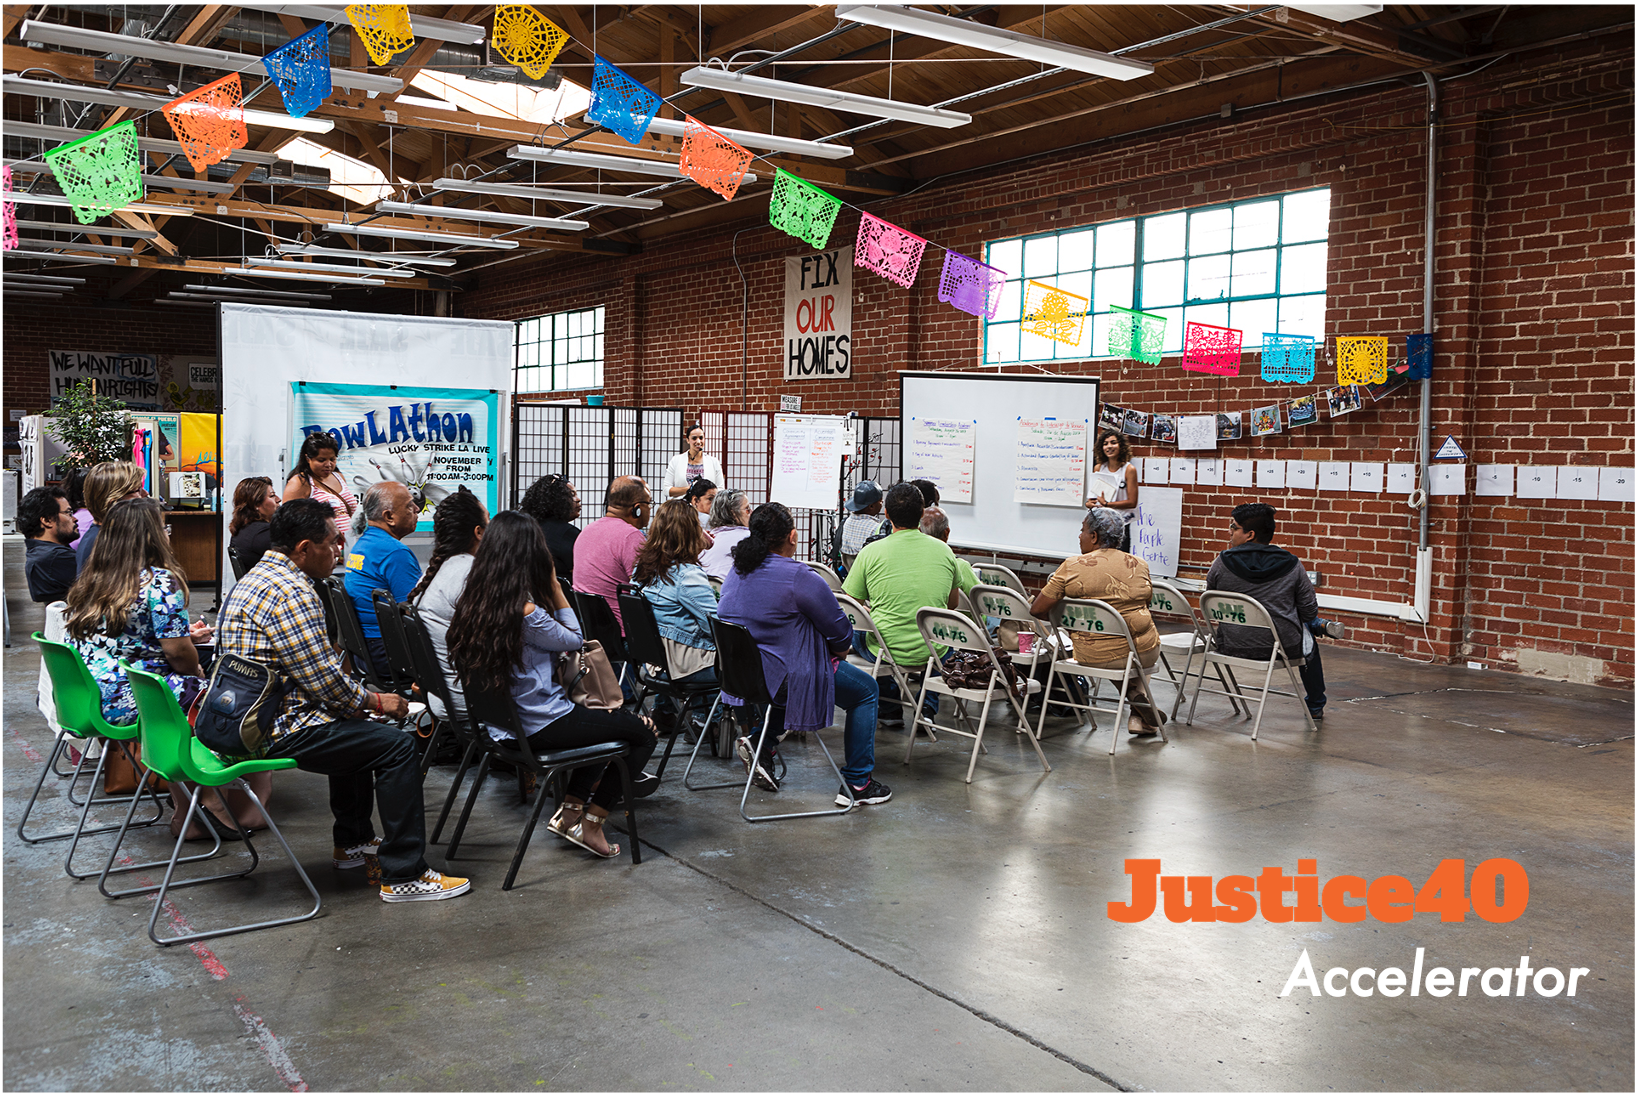 Family Justice Law Center - Social Justice Accelerator